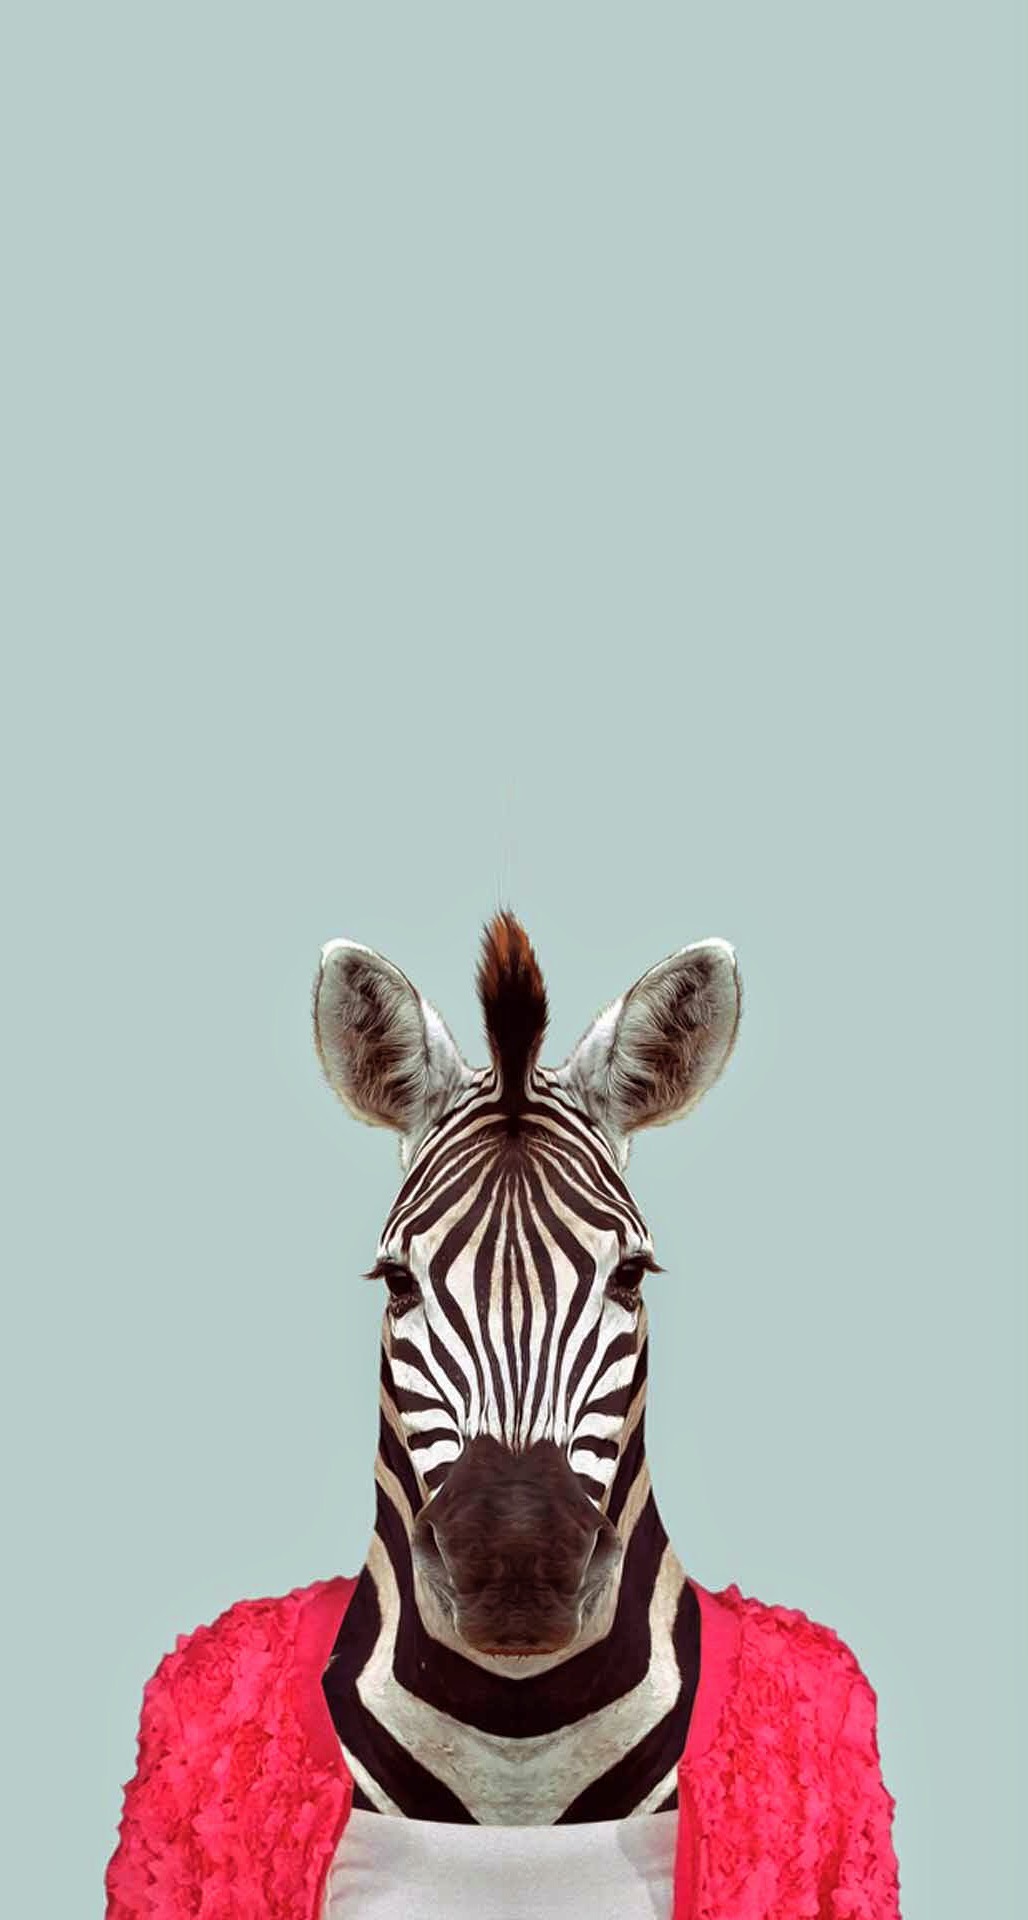 Funny Animal Wallpapers For Ipad - Rusty Pixels